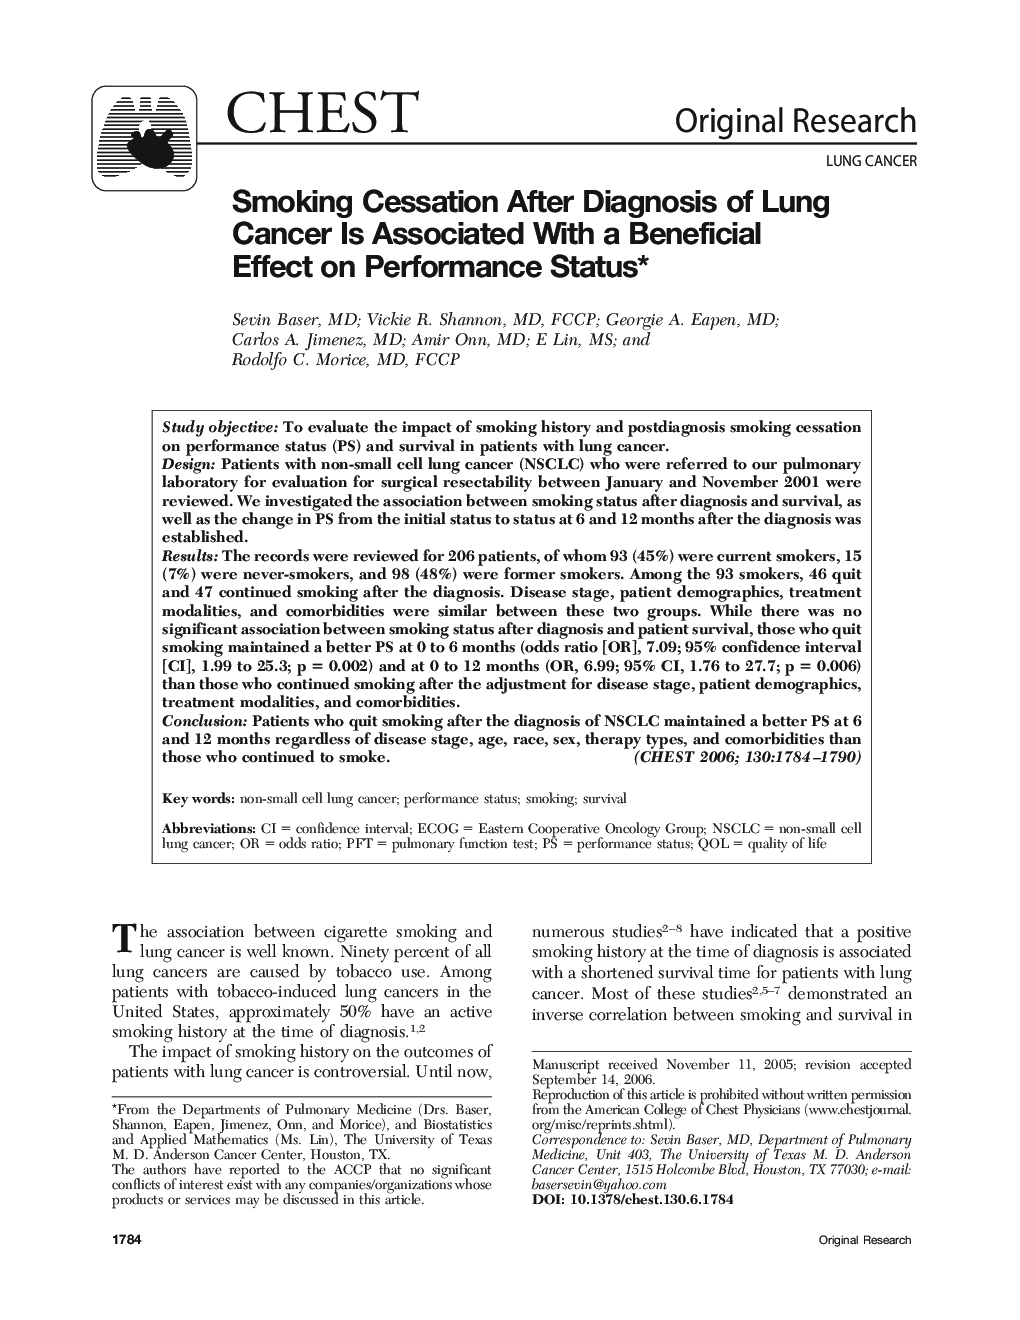 Smoking Cessation After Diagnosis of Lung Cancer Is Associated With a Beneficial Effect on Performance Status 